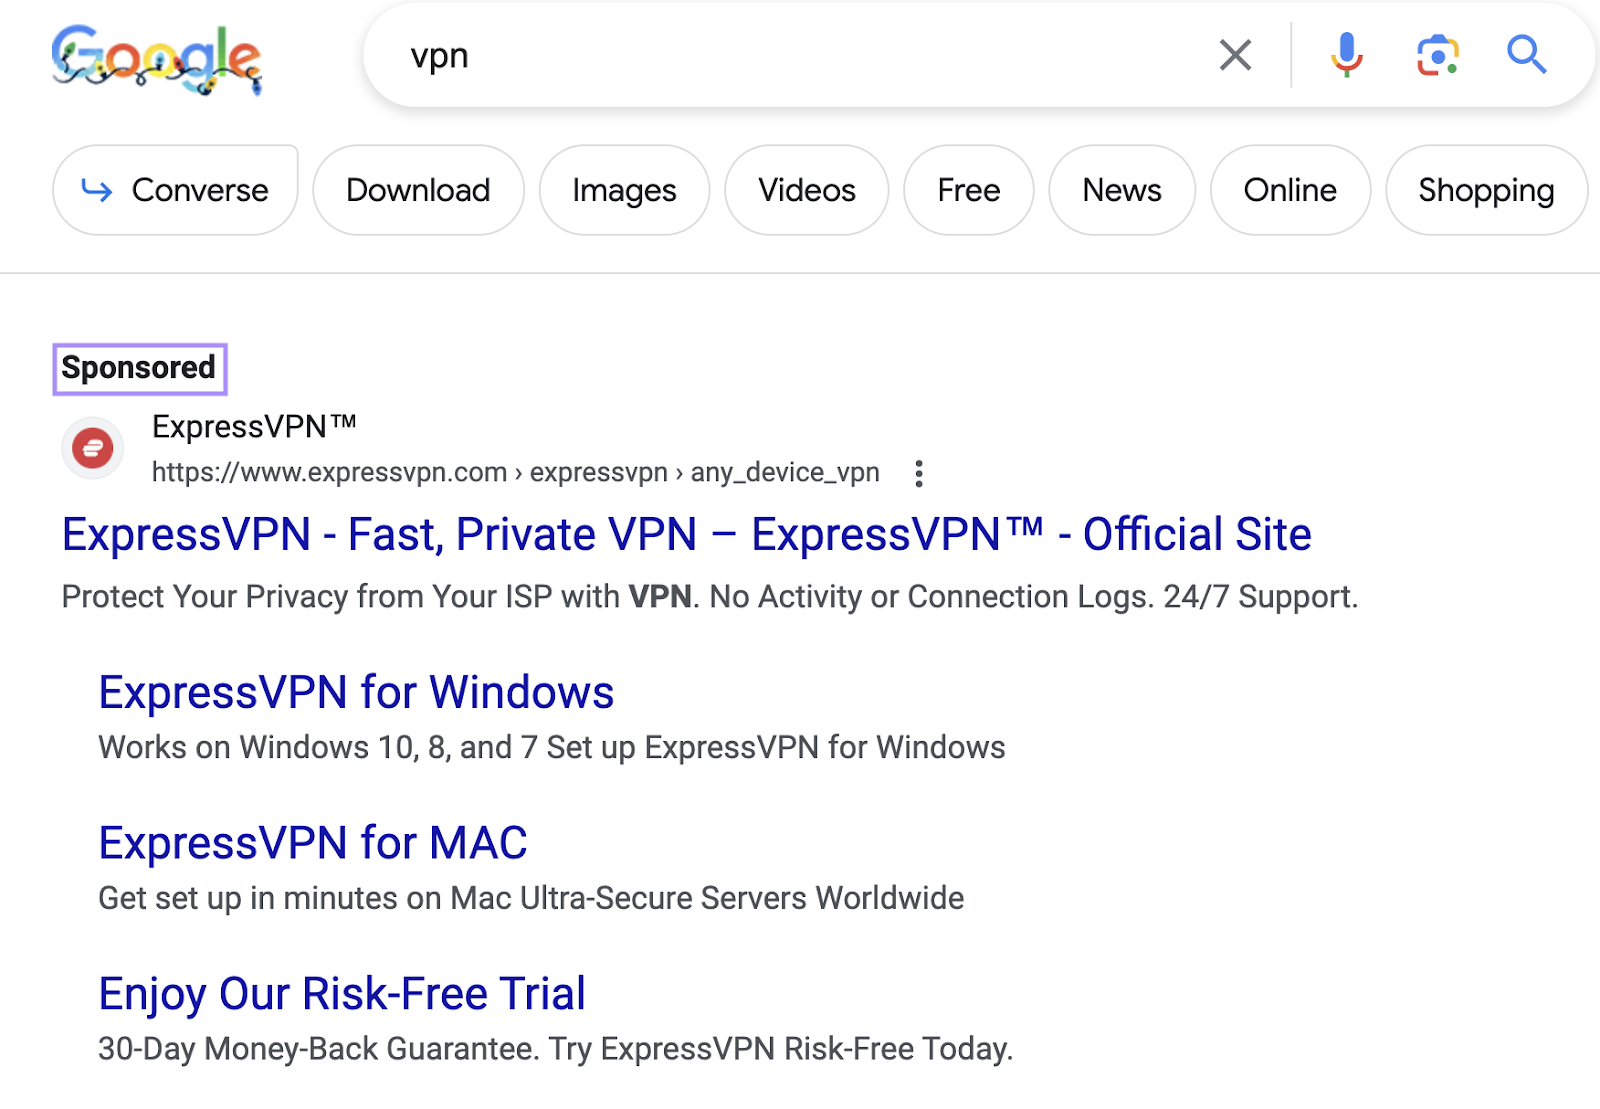 ExpressVPN's PPC ad on Google for the search term "vpn"